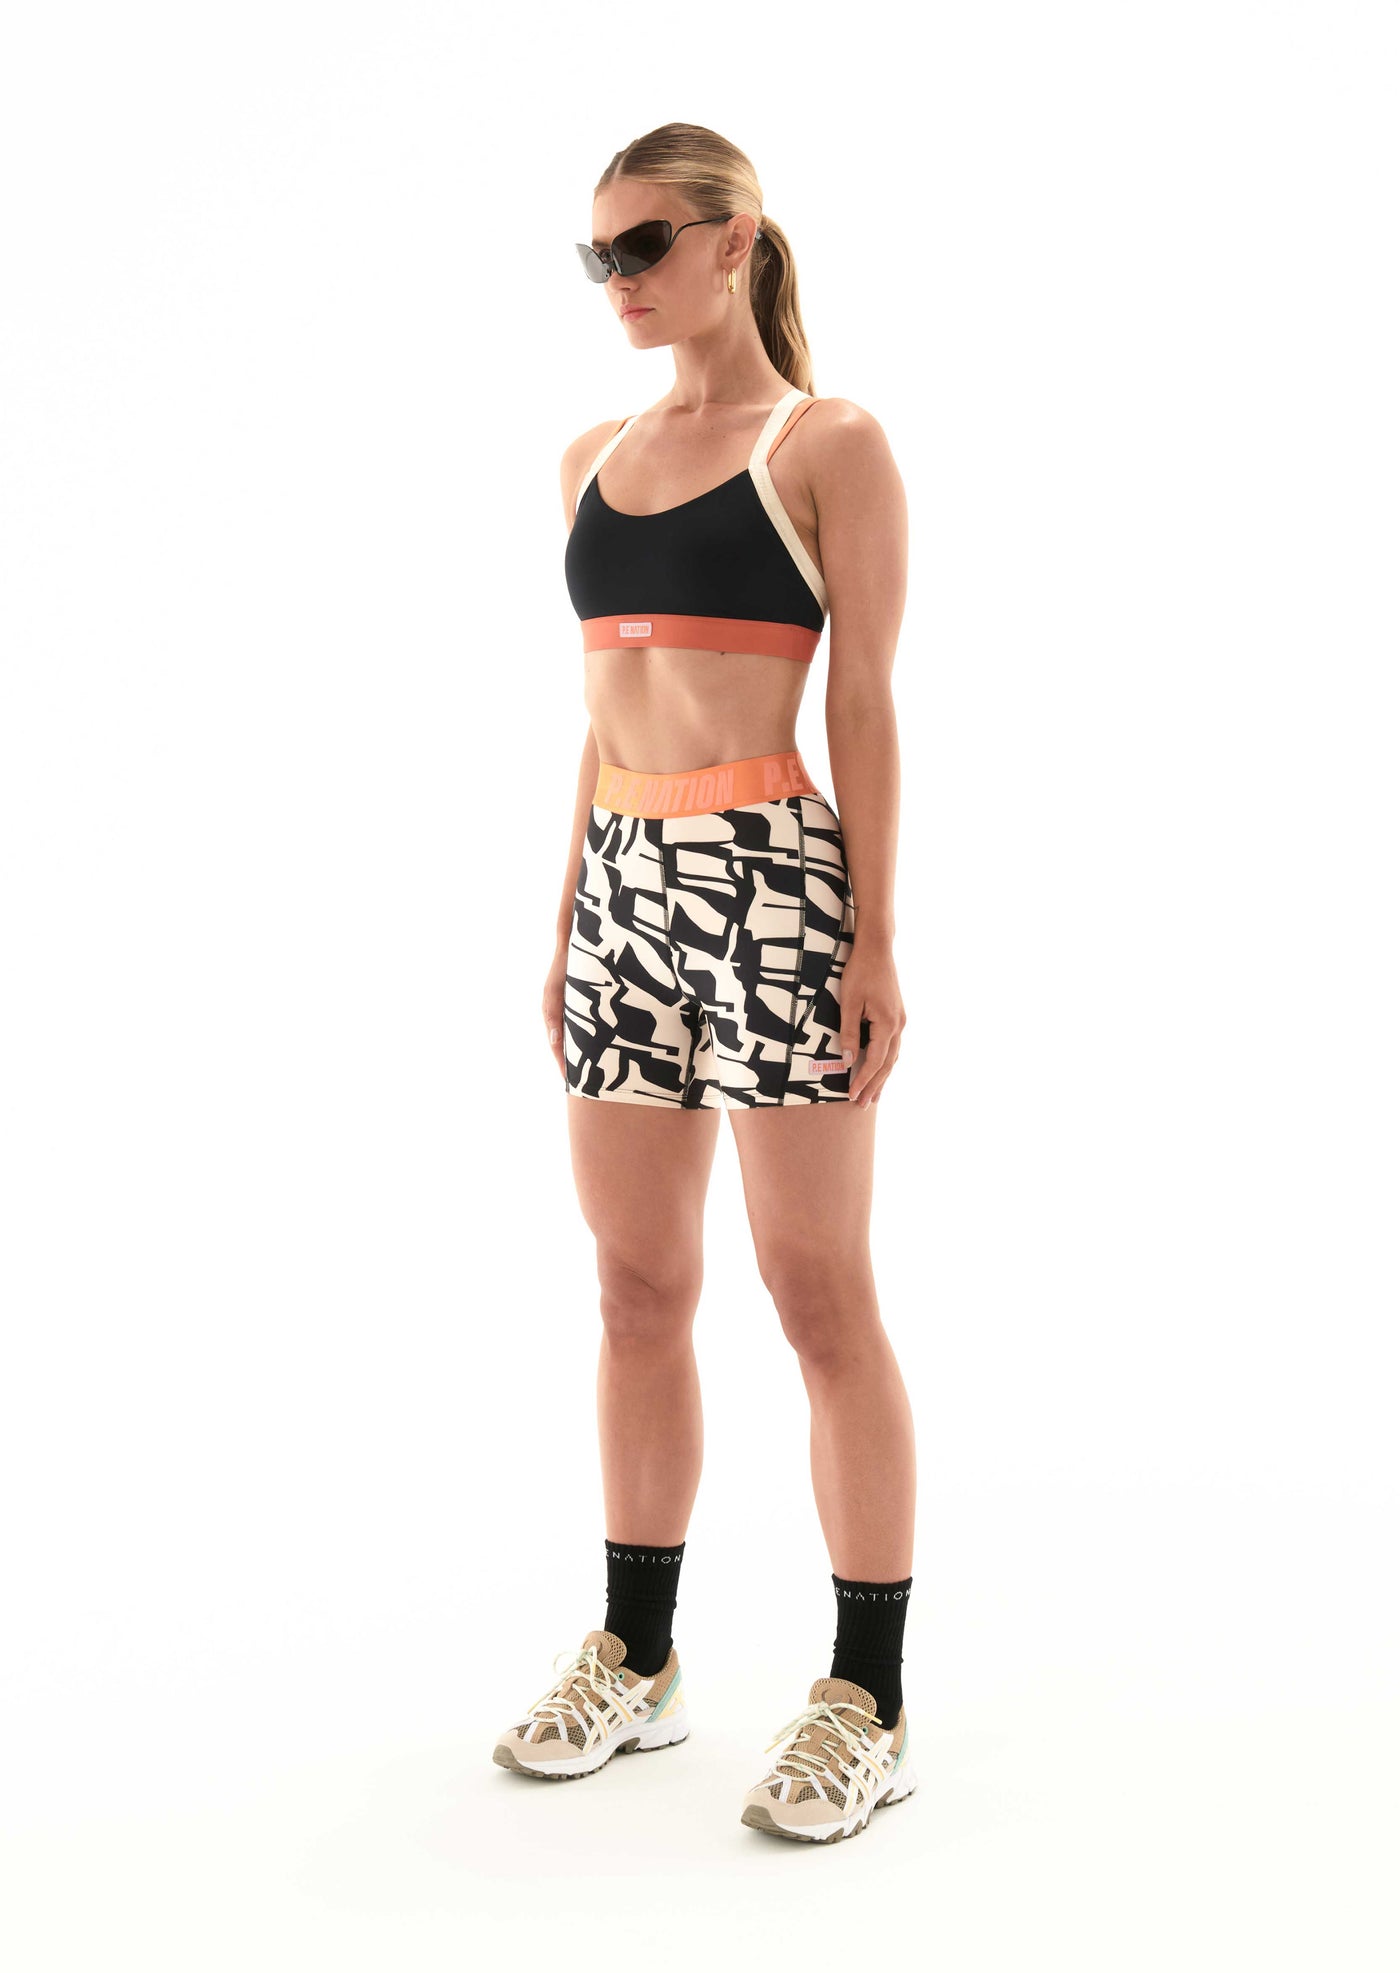 ROCKLAND BIKE SHORT IN ABSTRACT PRINT